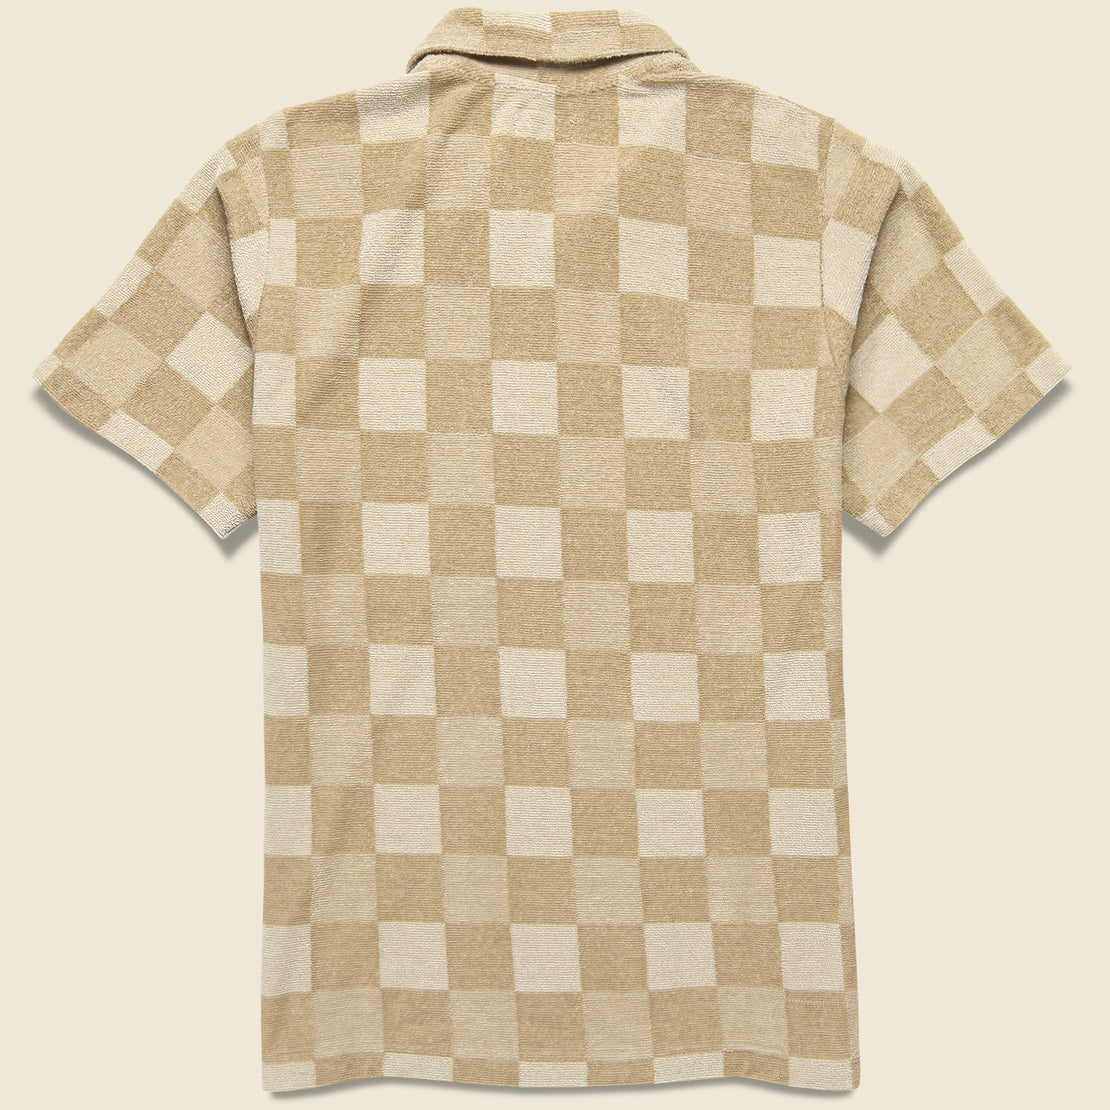 Terry Checkerboard Vacation Polo - Sand - Universal Works - STAG Provisions - Tops - S/S Knit